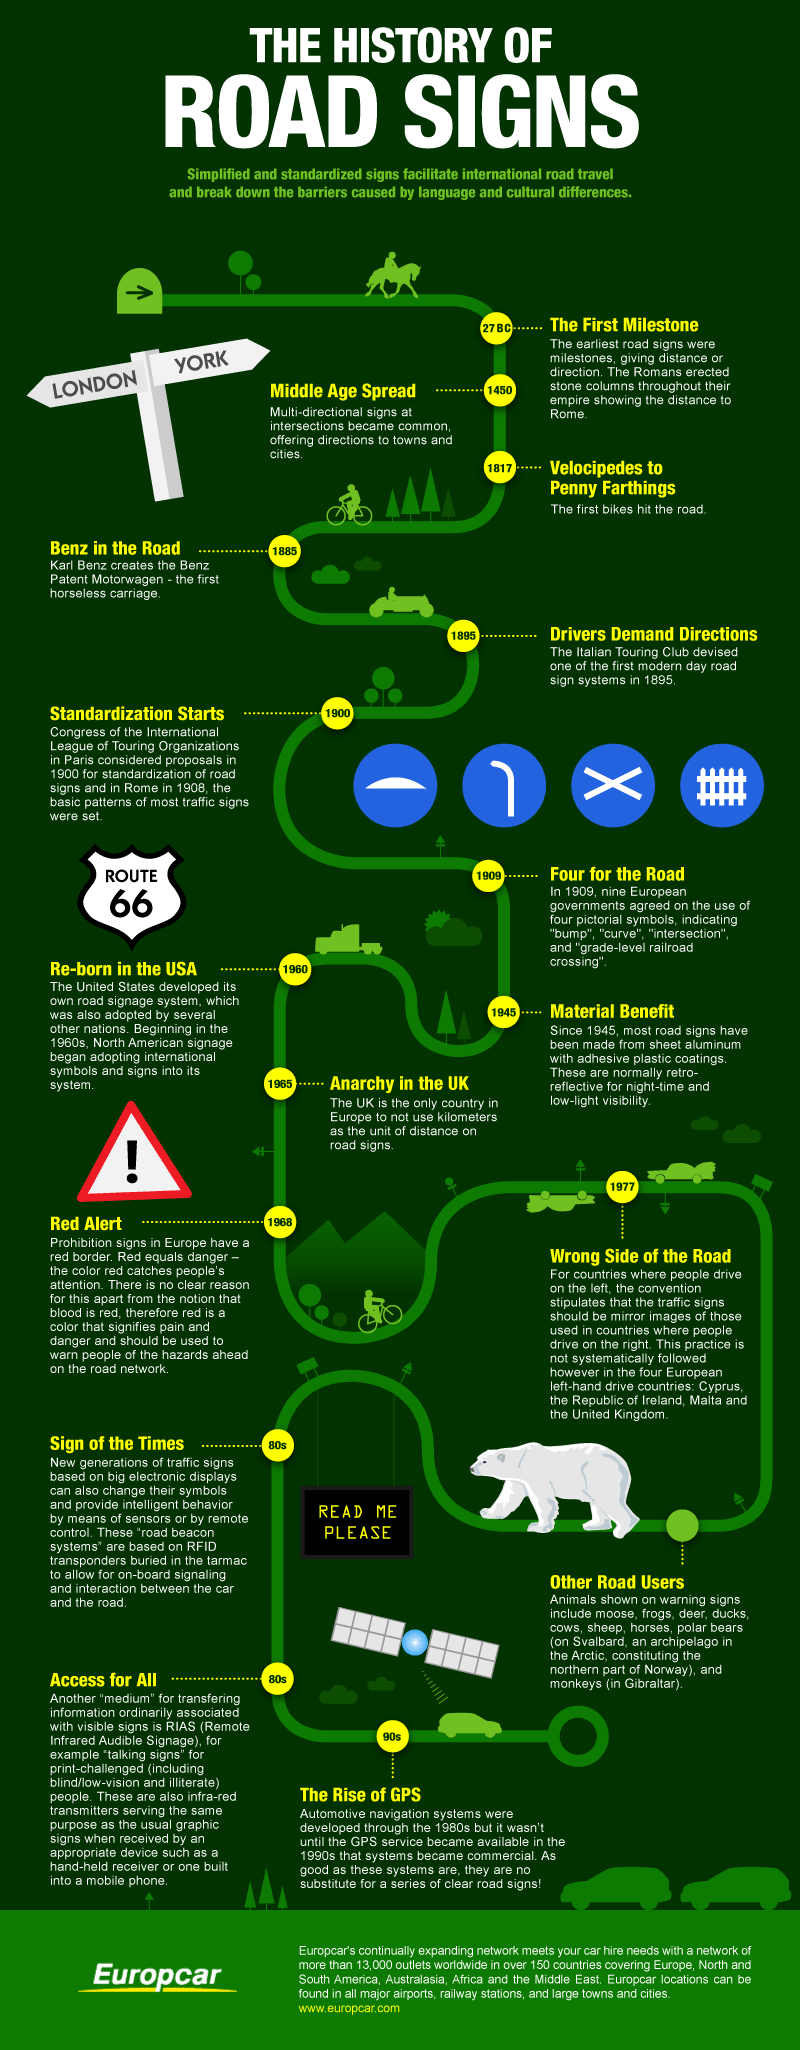 The History of Road Signs